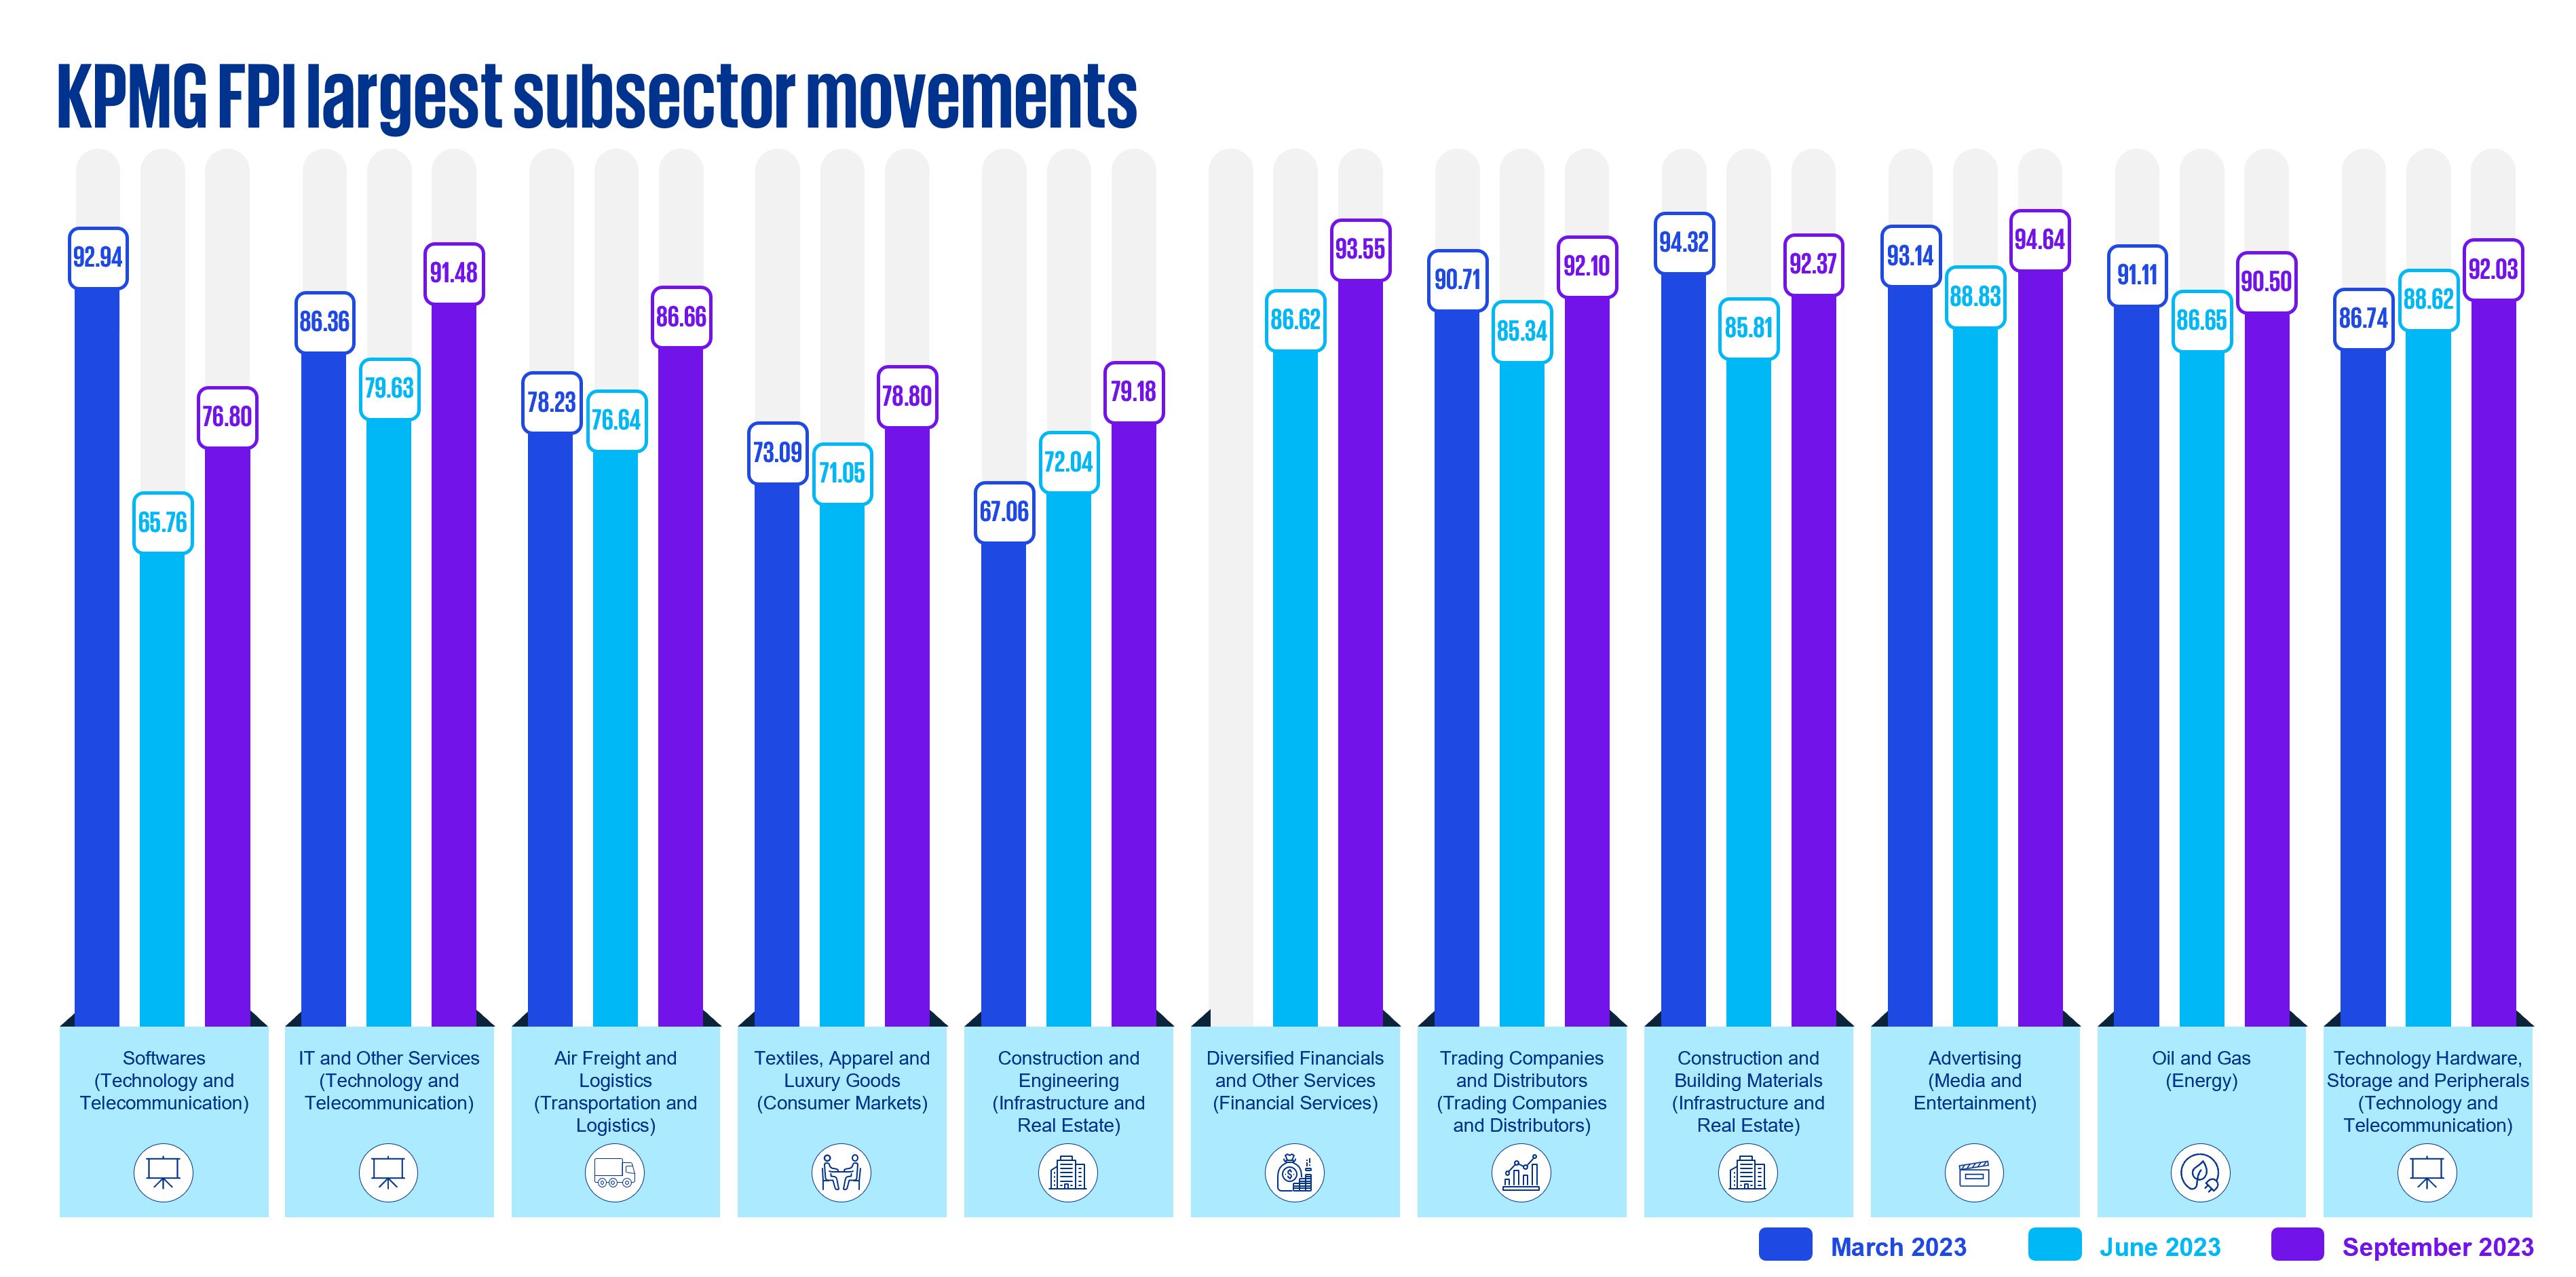 id-kpmg-fpi-3q23-largest-subsector-movements2